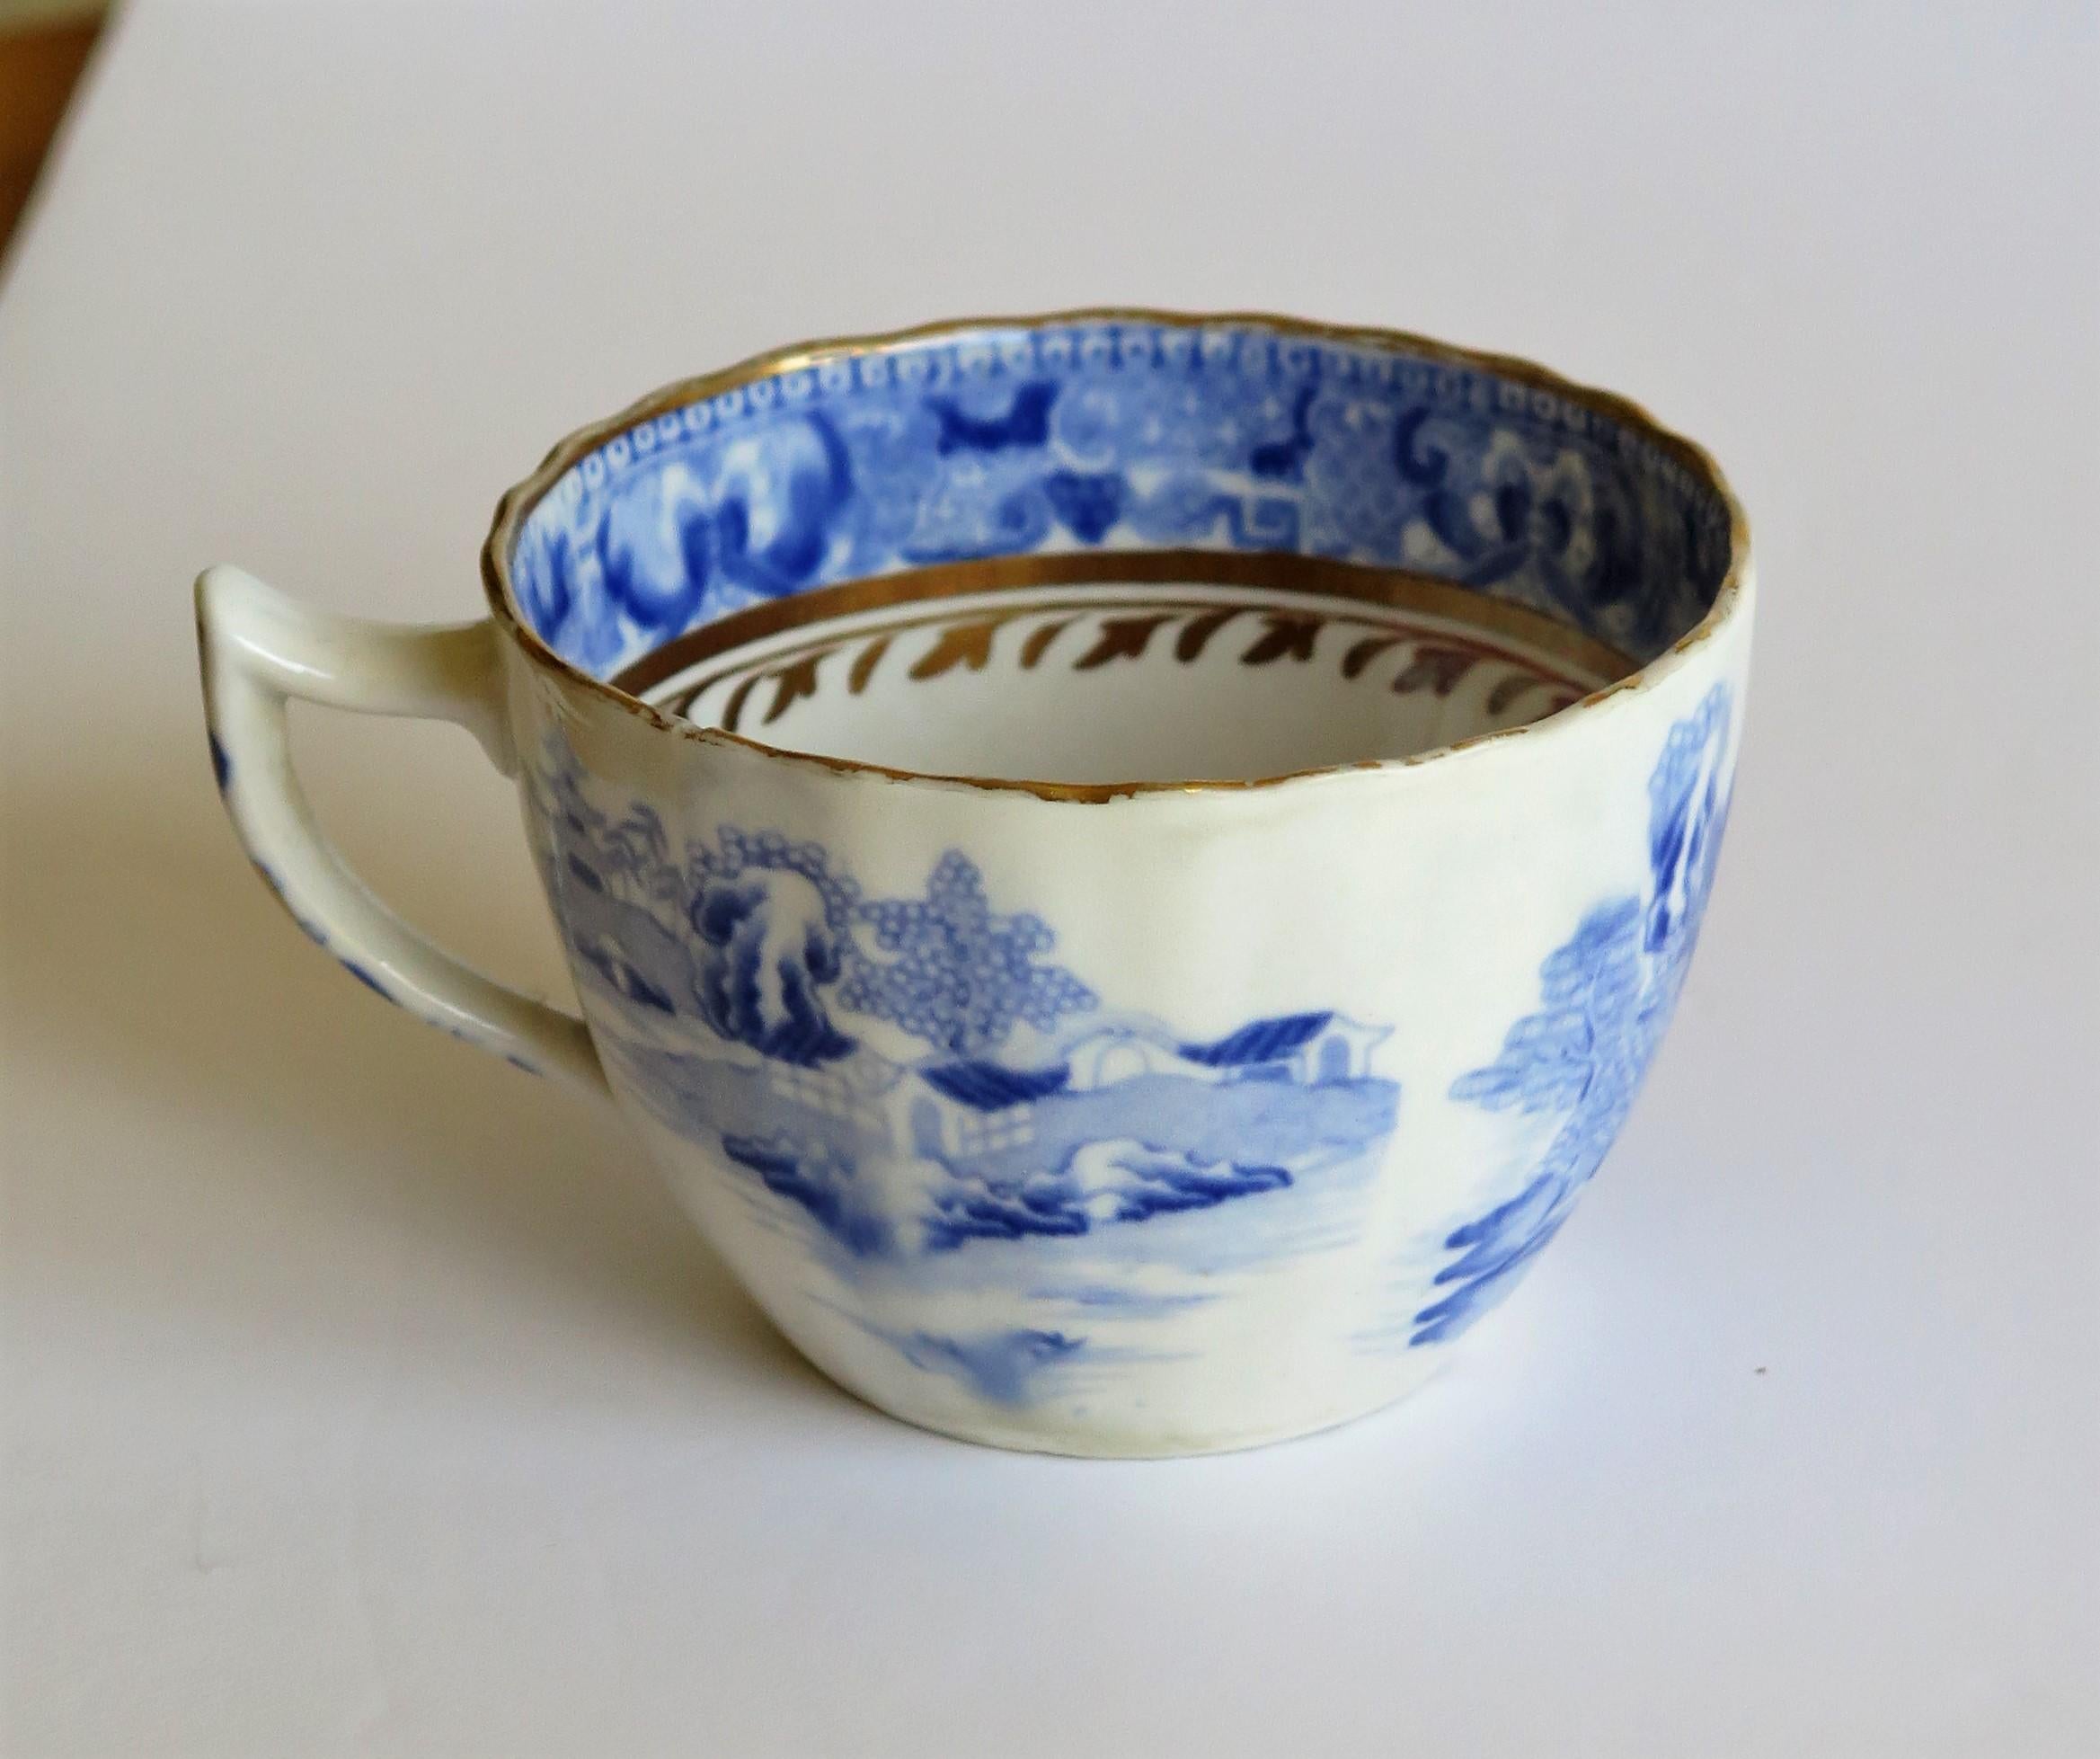 Miles Mason Porcelain Pair of Tea Cups Broseley Blue and White Pattern, Ca 1805 2